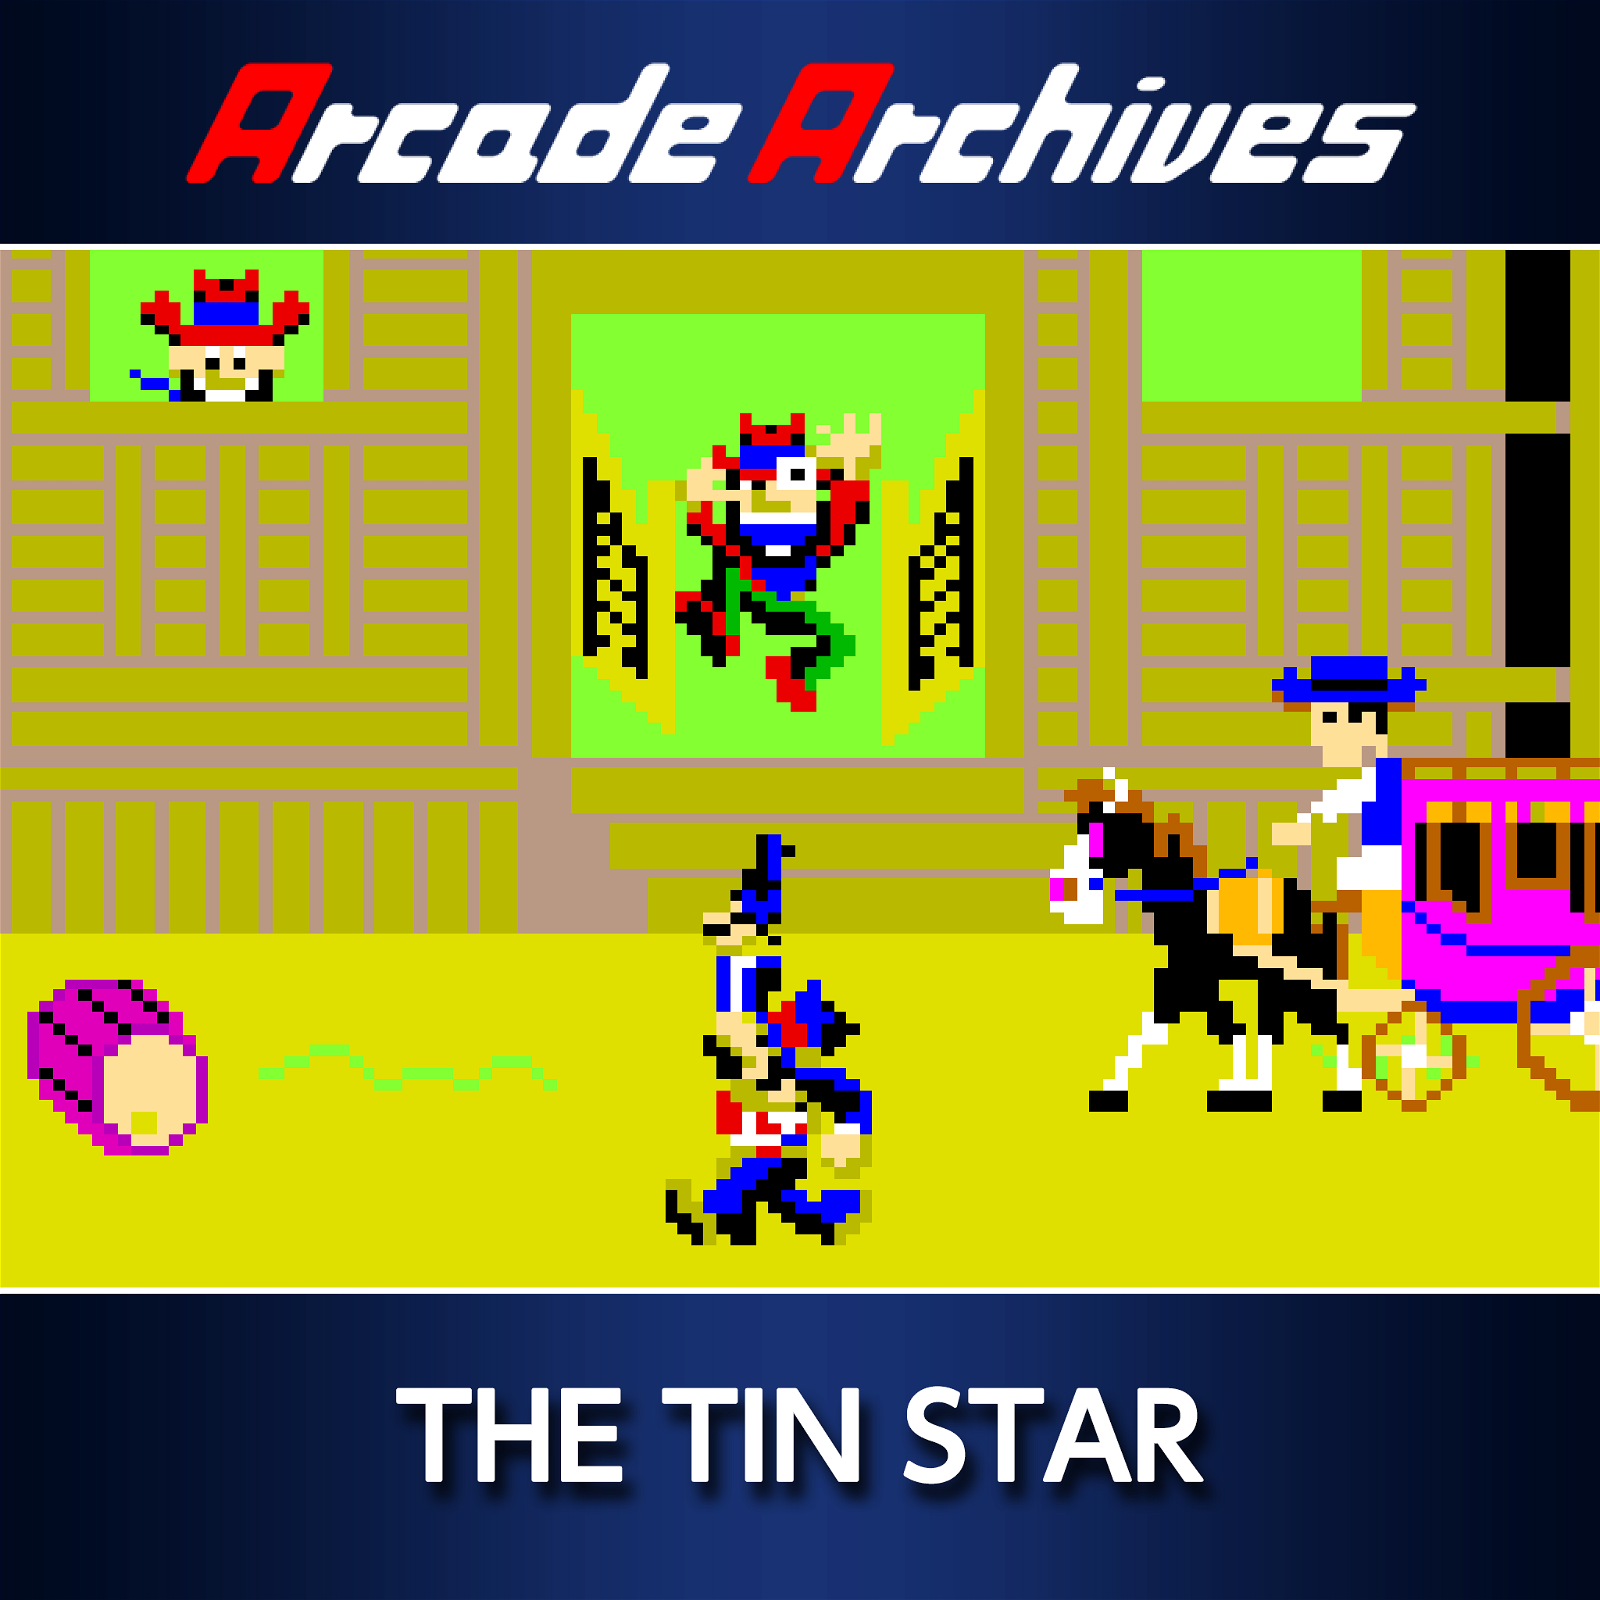 Image of Arcade Archives THE TIN STAR